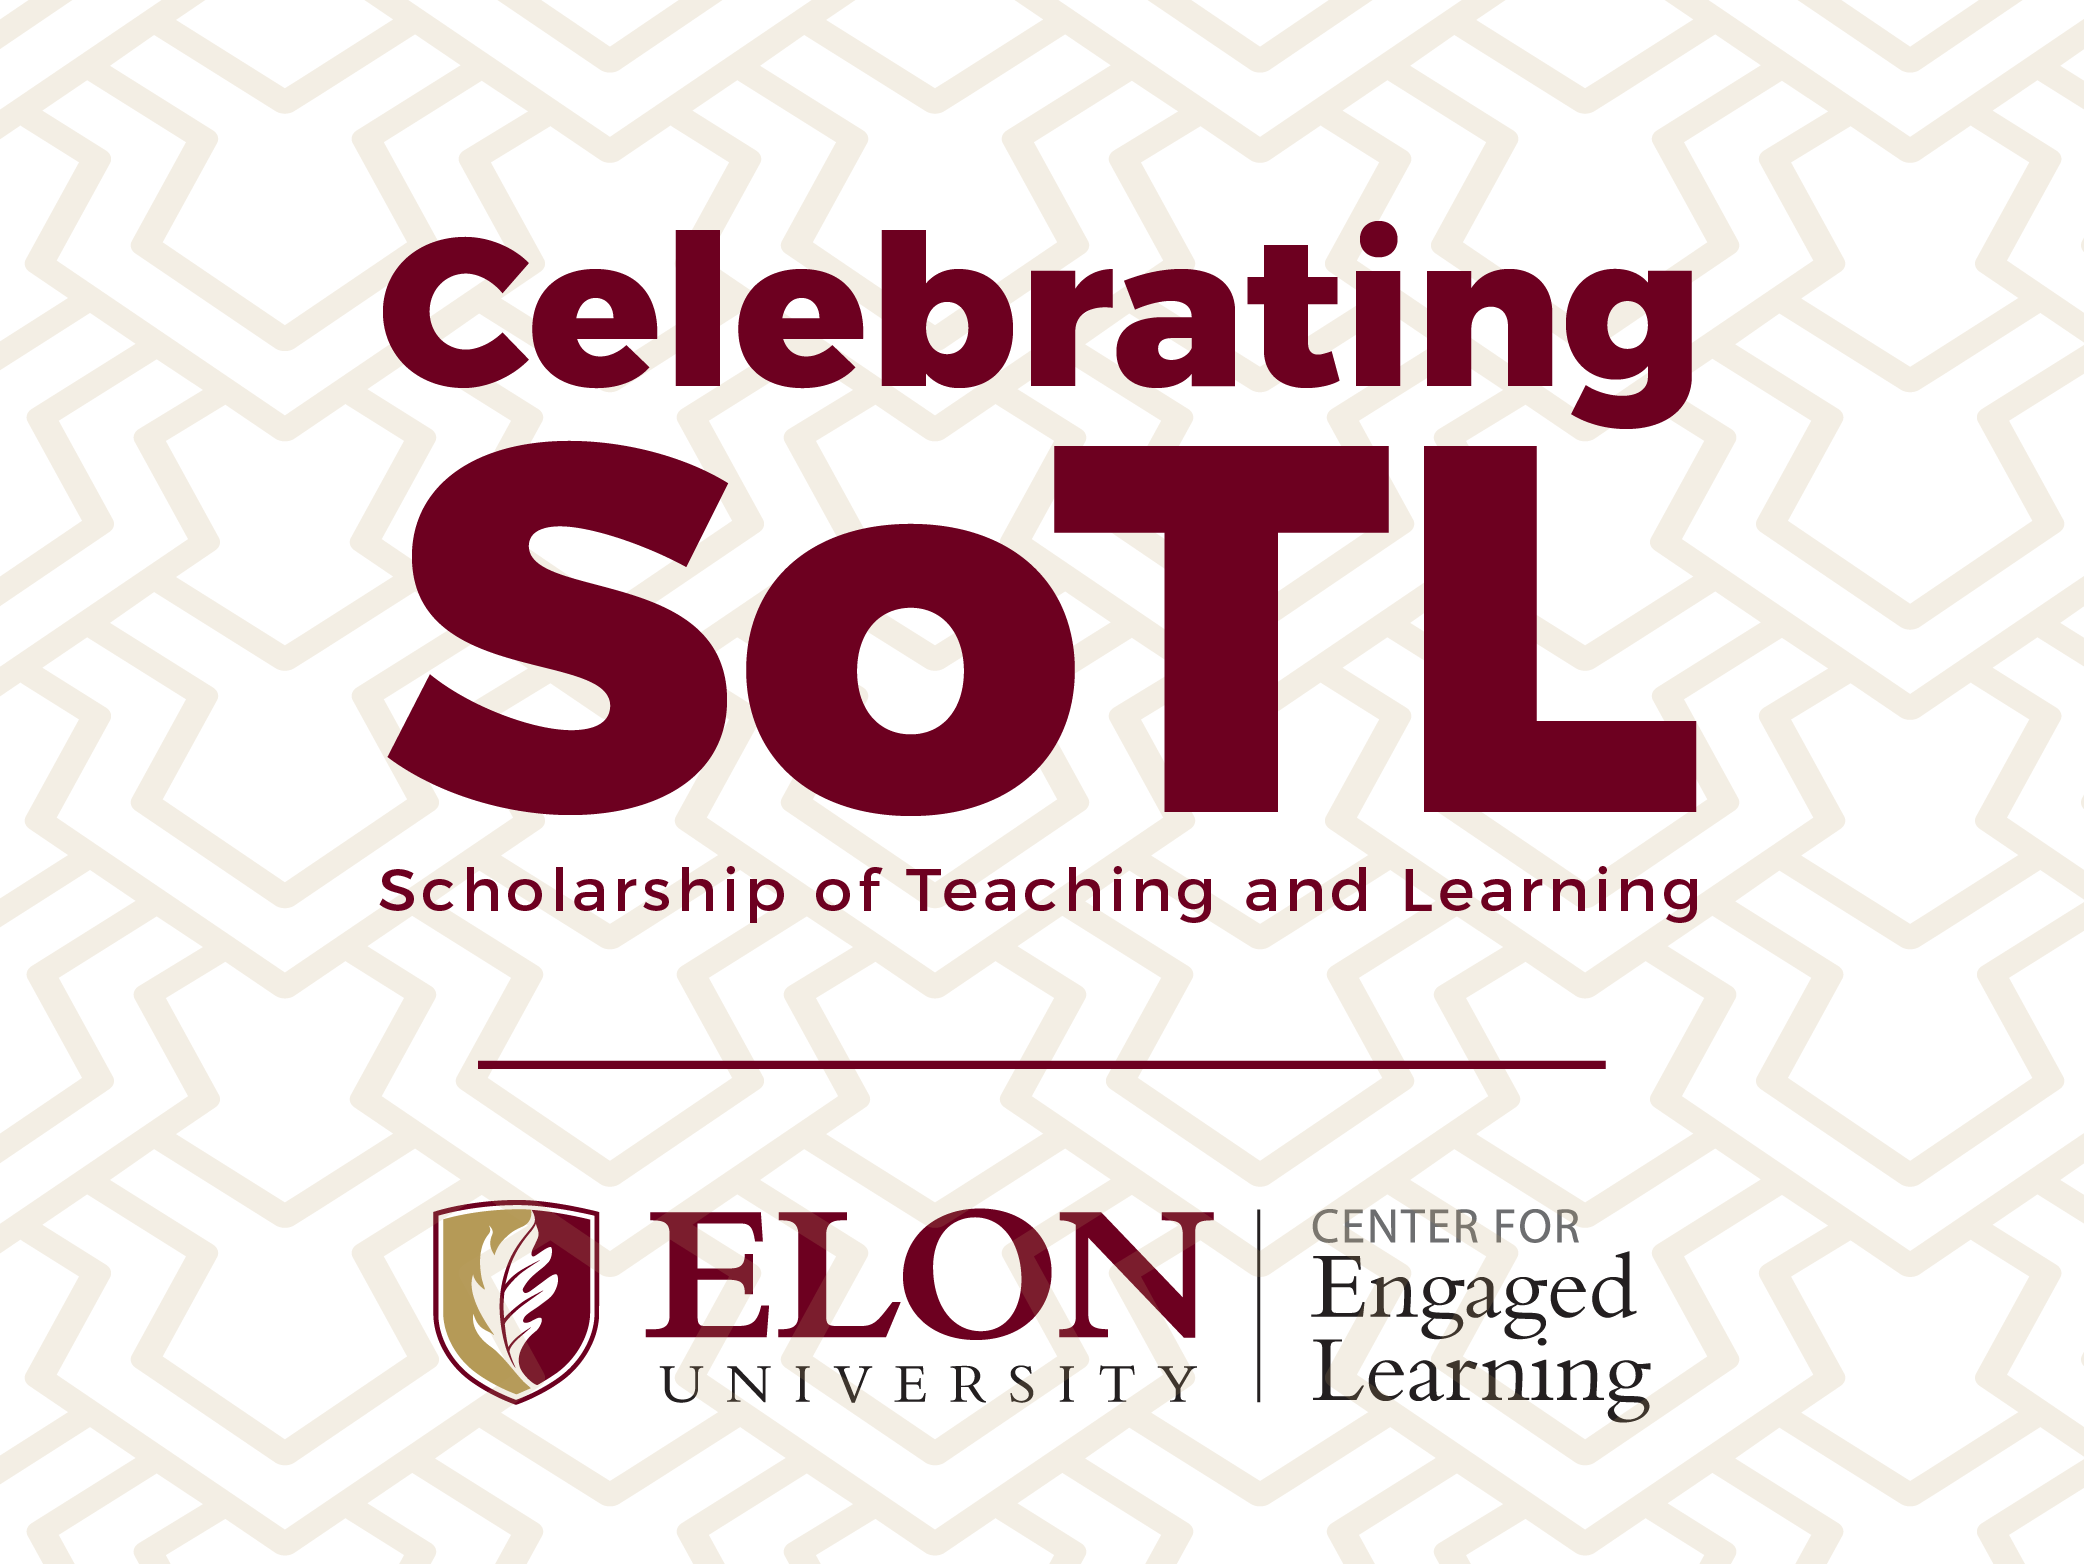 Celebrating SoTL - Scholarship of Teaching and Learning - Center for Engaged Learning